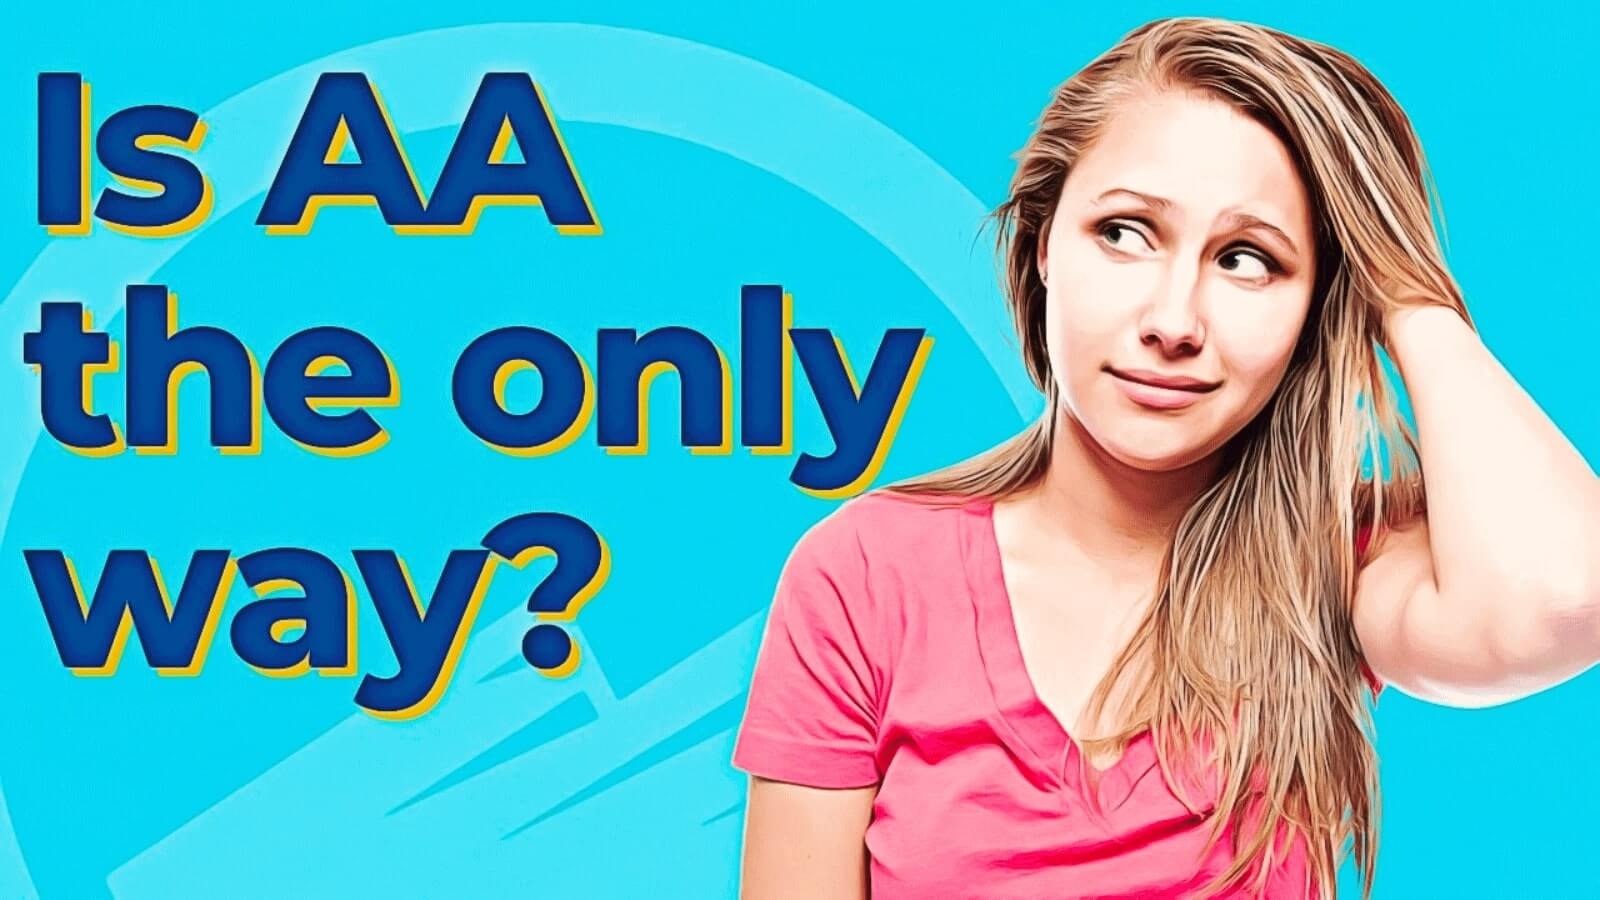 Is AA the only way? text written next to an image of woman scratching her head